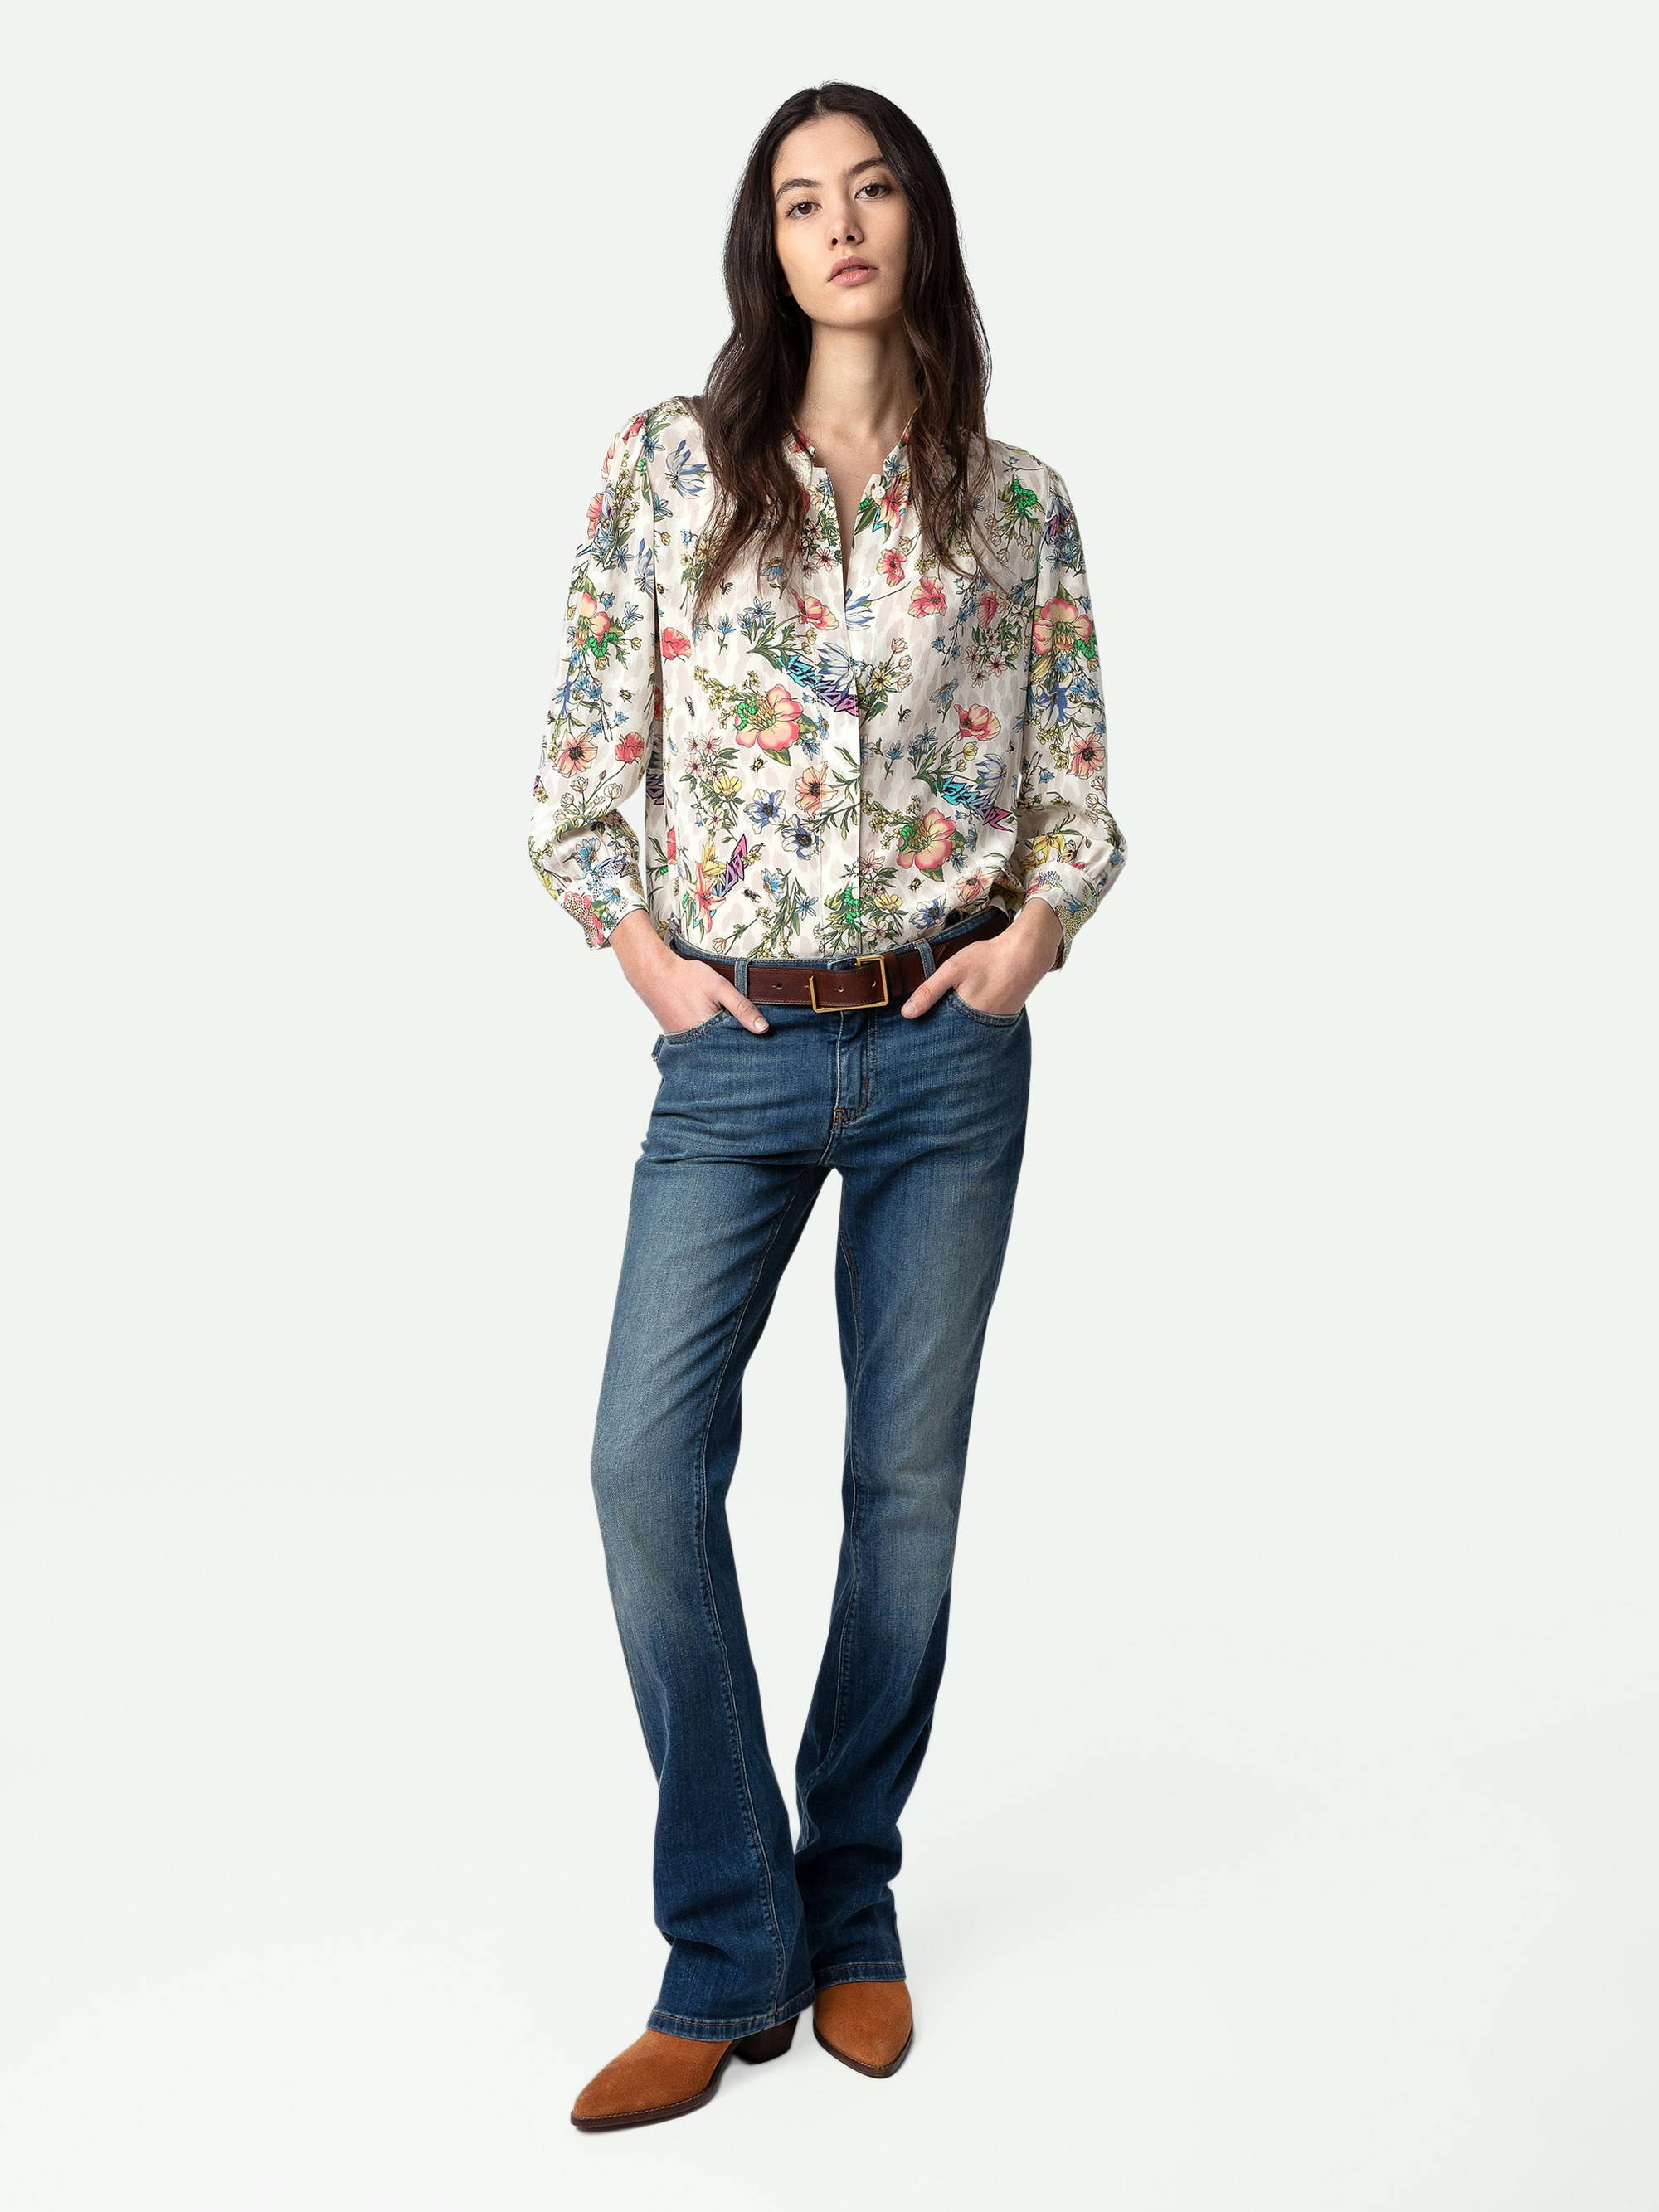 Tadeo Diamanté Silk Blouse - Ecru silk blouse with Twisted Garden print, 3/4-length sleeves and diamanté-embellished cuffs.